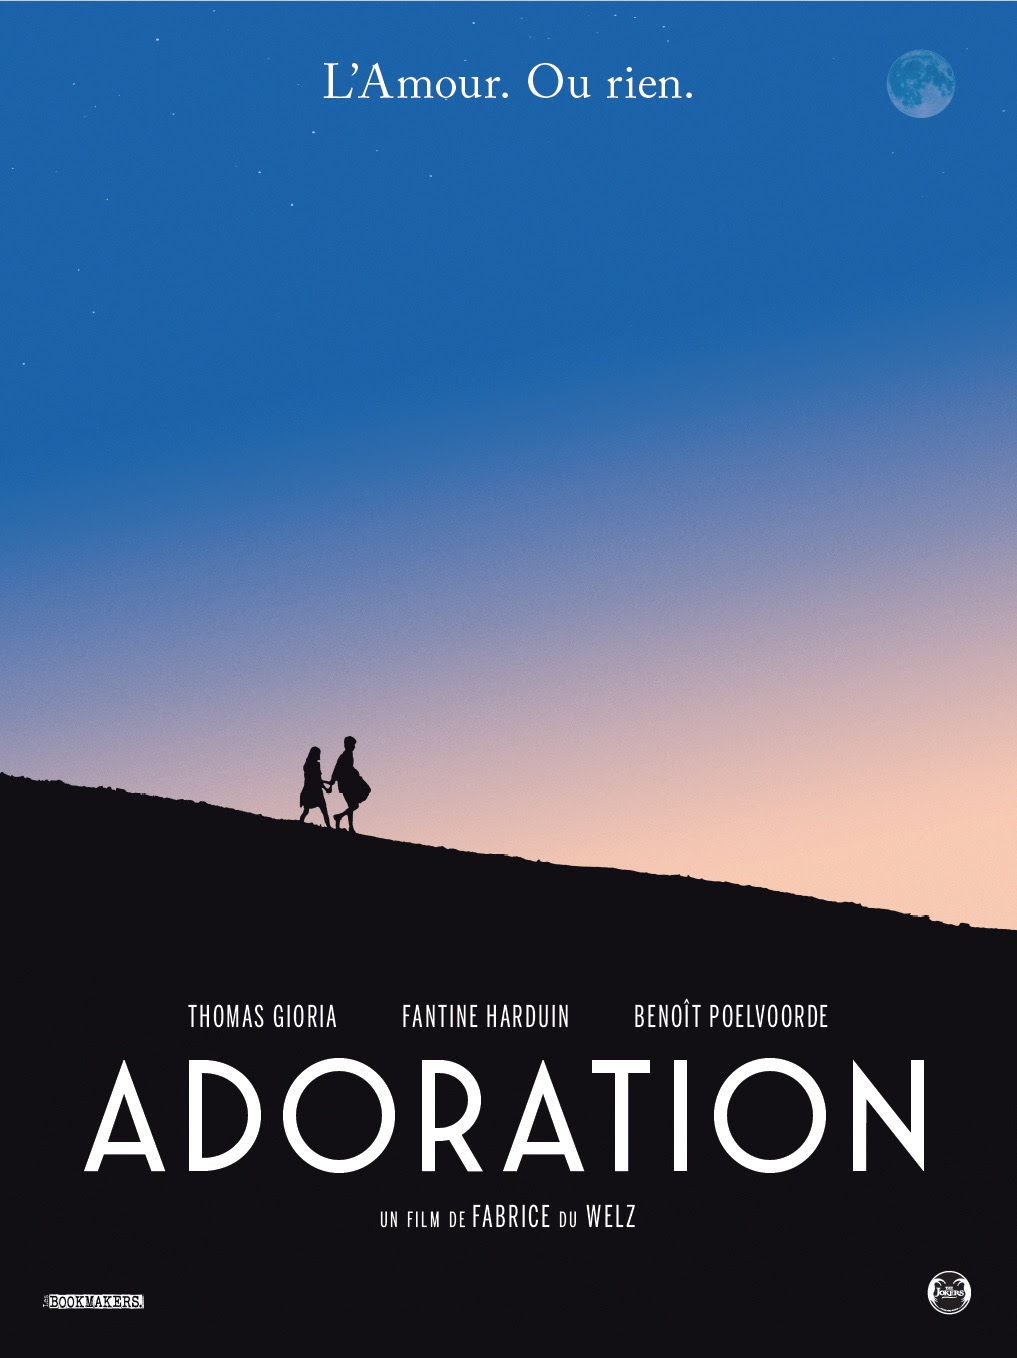 Adoration film review: young love turns sour